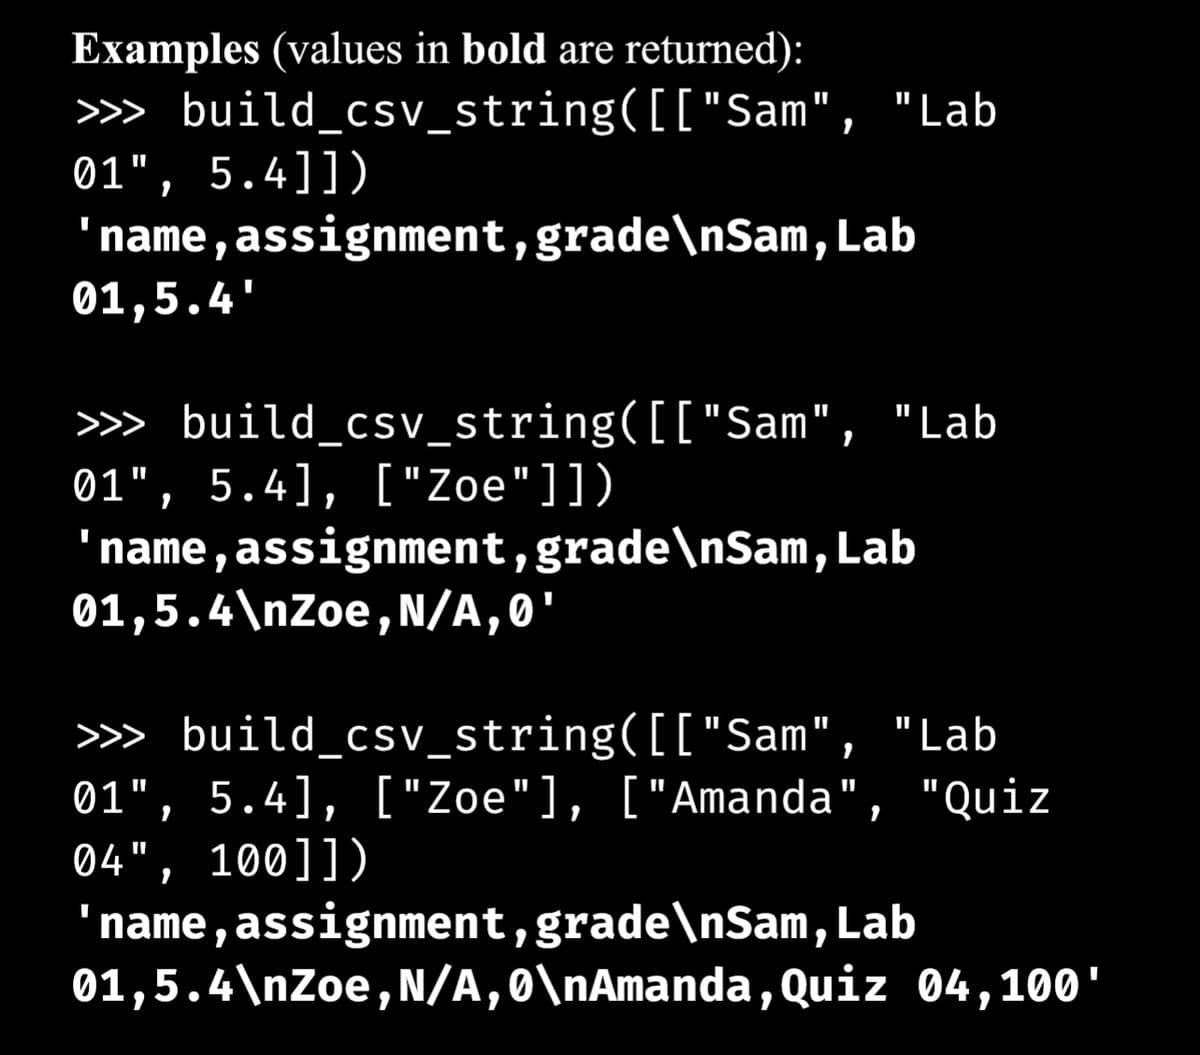 Examples (values in bold are returned):
>>> build_csv_string([["Sam", "Lab
01", 5.4]])
'name, assignment, grade\nSam, Lab
01,5.4'
>>> build_csv_string([["Sam", "Lab
01", 5.4], ["Zoe"]])
'name, assignment, grade\nSam, Lab
01,5.4\nZoe, N/A, 0'
>>> build_csv_string([["Sam", "Lab
01", 5.4], ["Zoe"], ["Amanda", "Quiz
04", 100]])
'name, assignment, grade\nSam, Lab
01,5.4\nZoe, N/A, 0\nAmanda, Quiz 04,100'